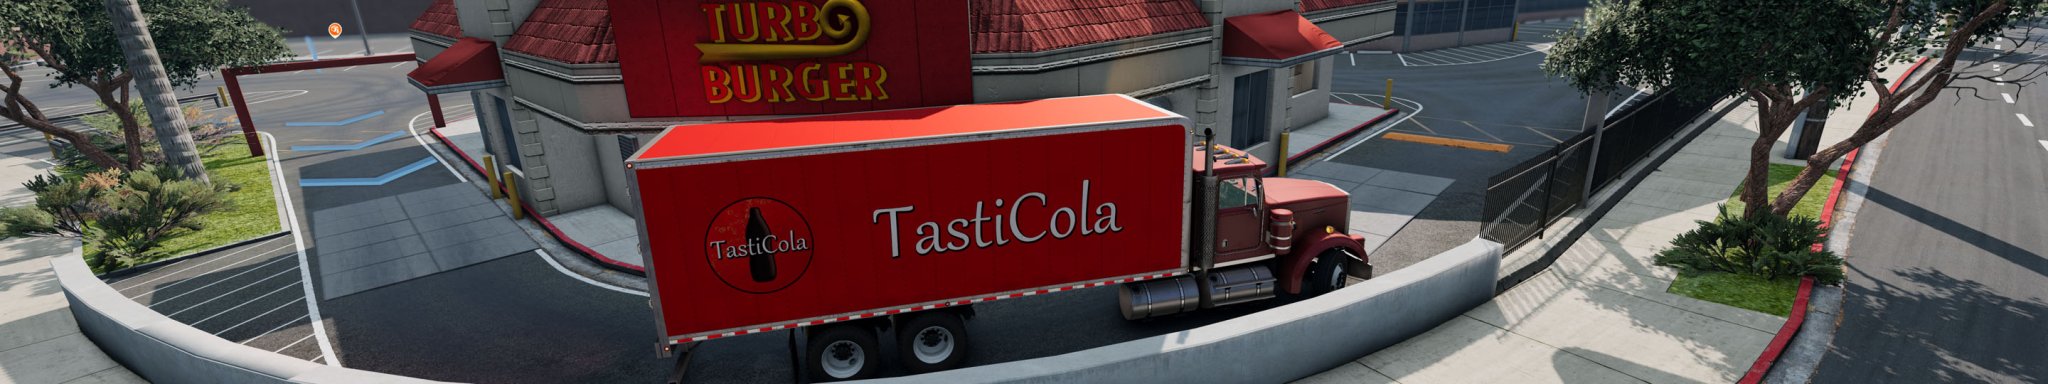 1 BeamNG Career Mode TURBO BURGER TRUCK Delivery copy.jpg